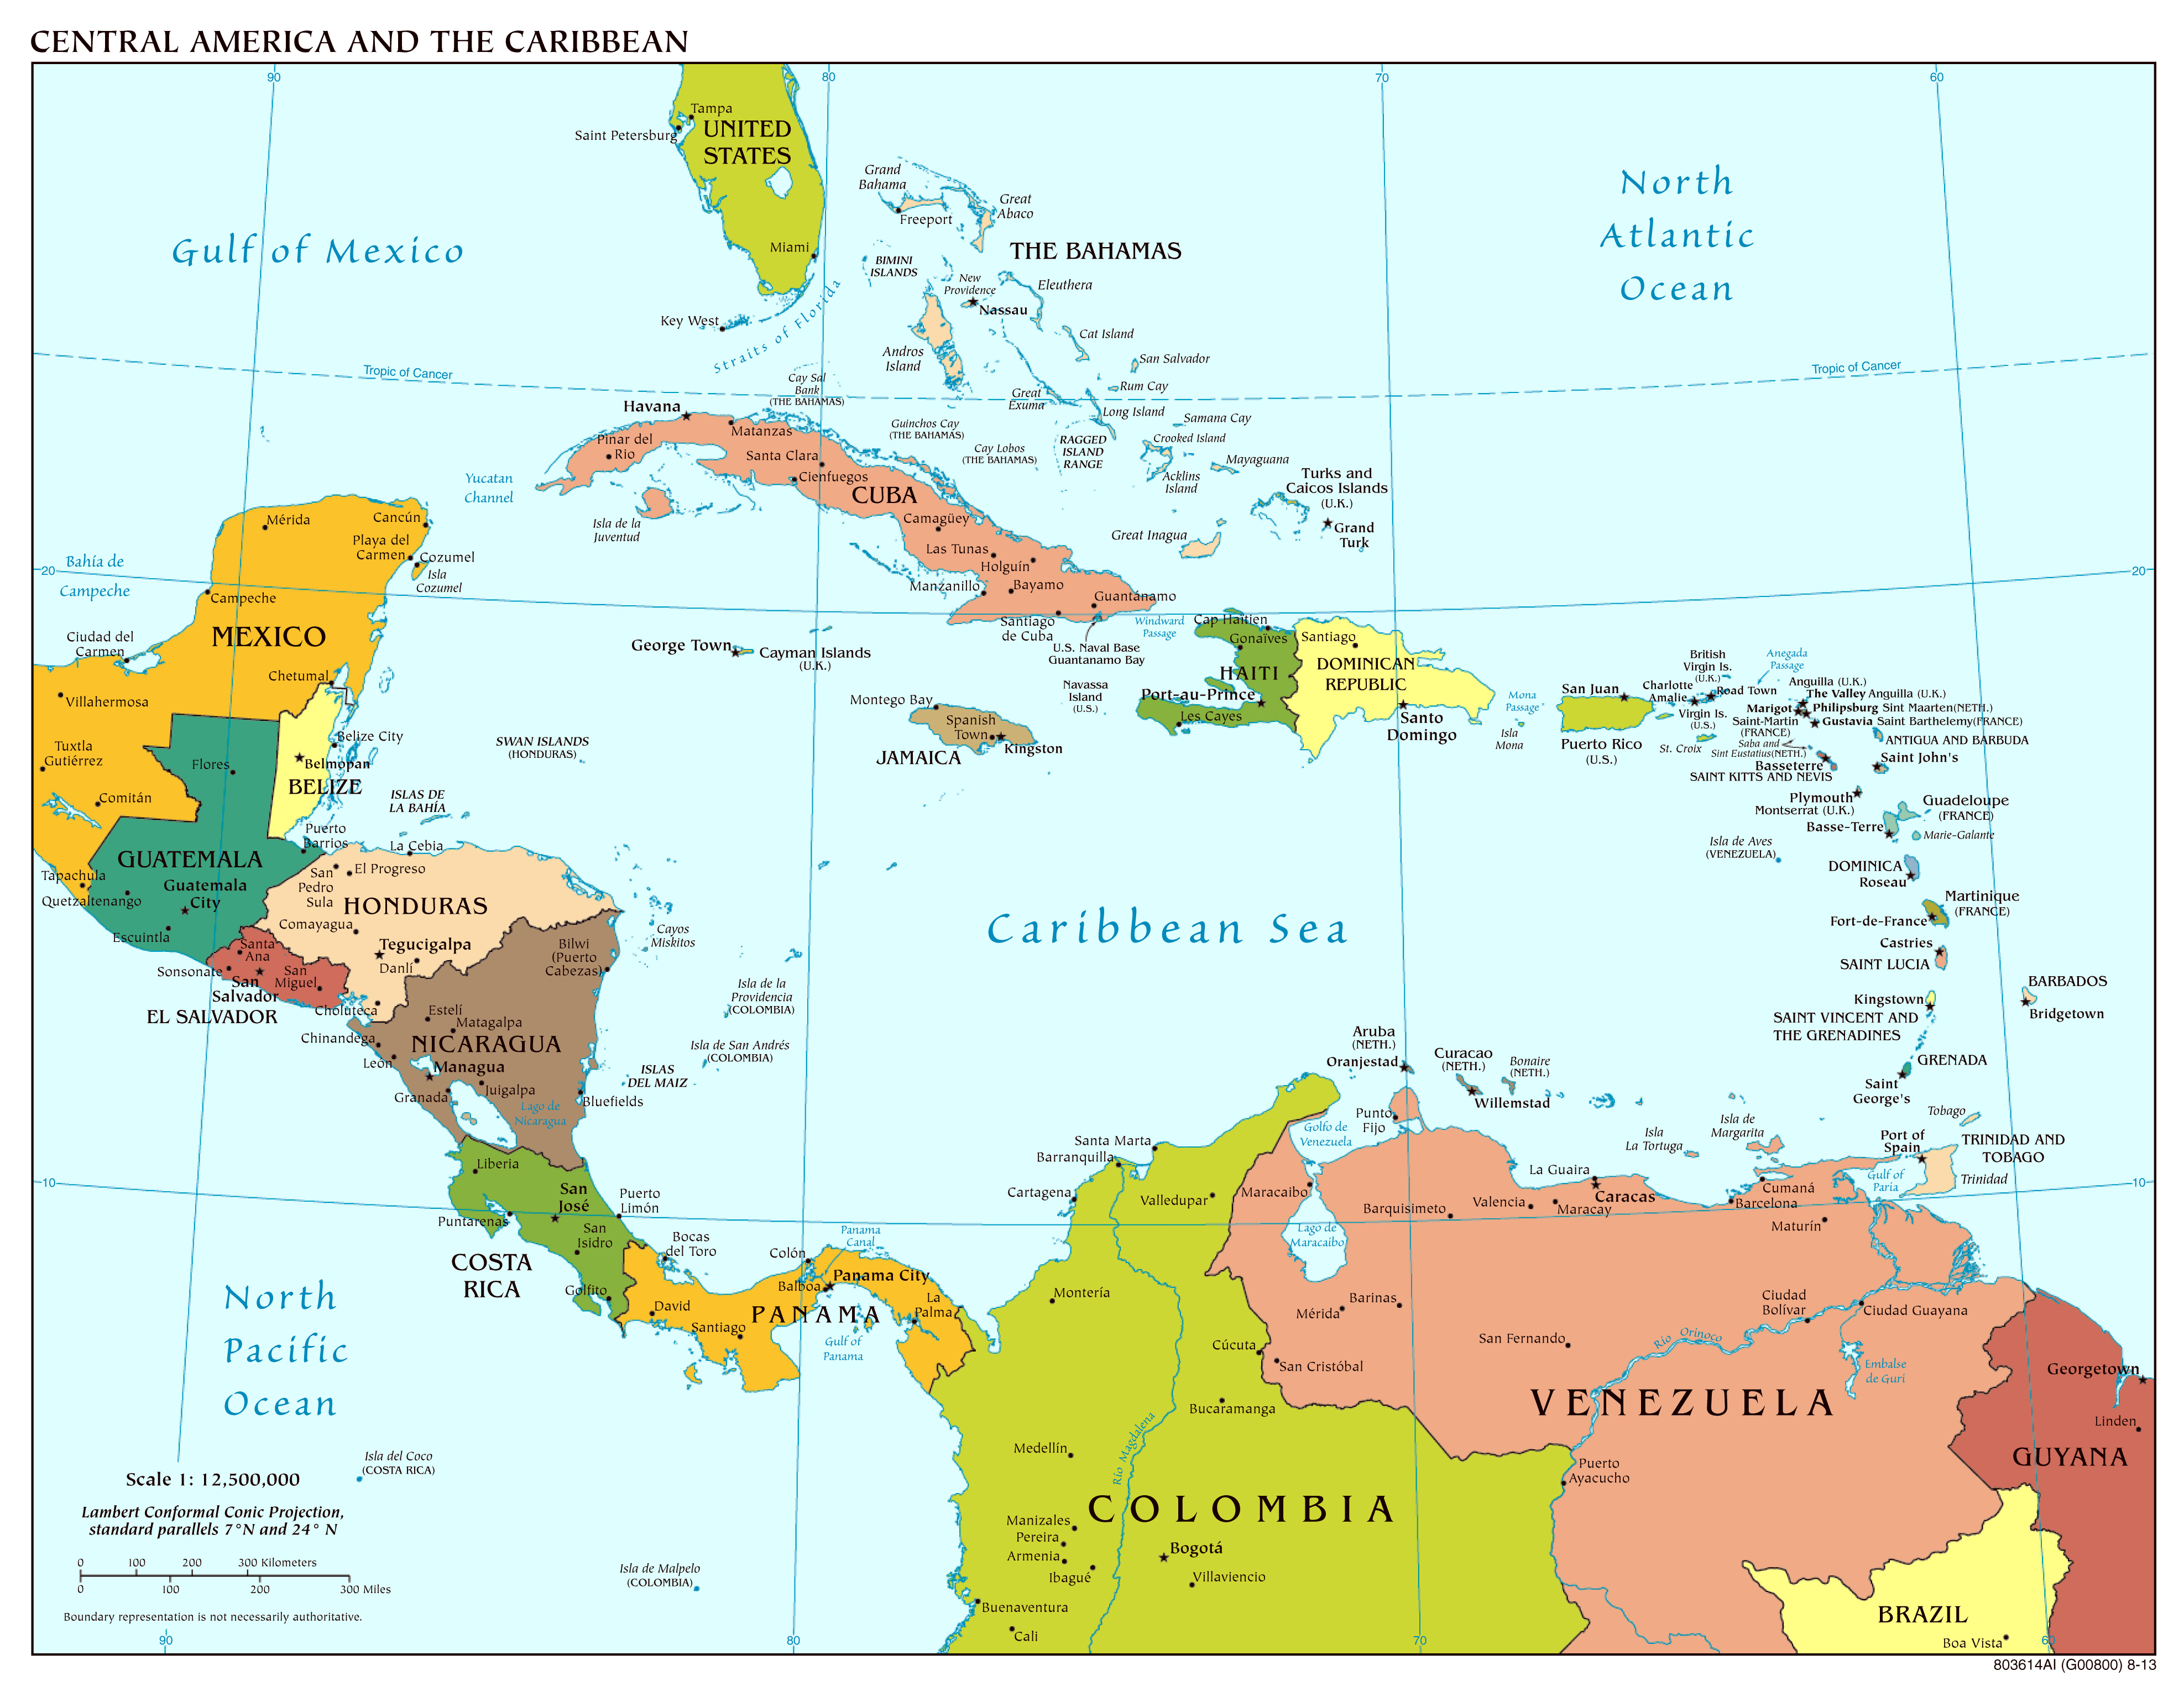 Large Scale Political Map Of Central America With Major Cities And